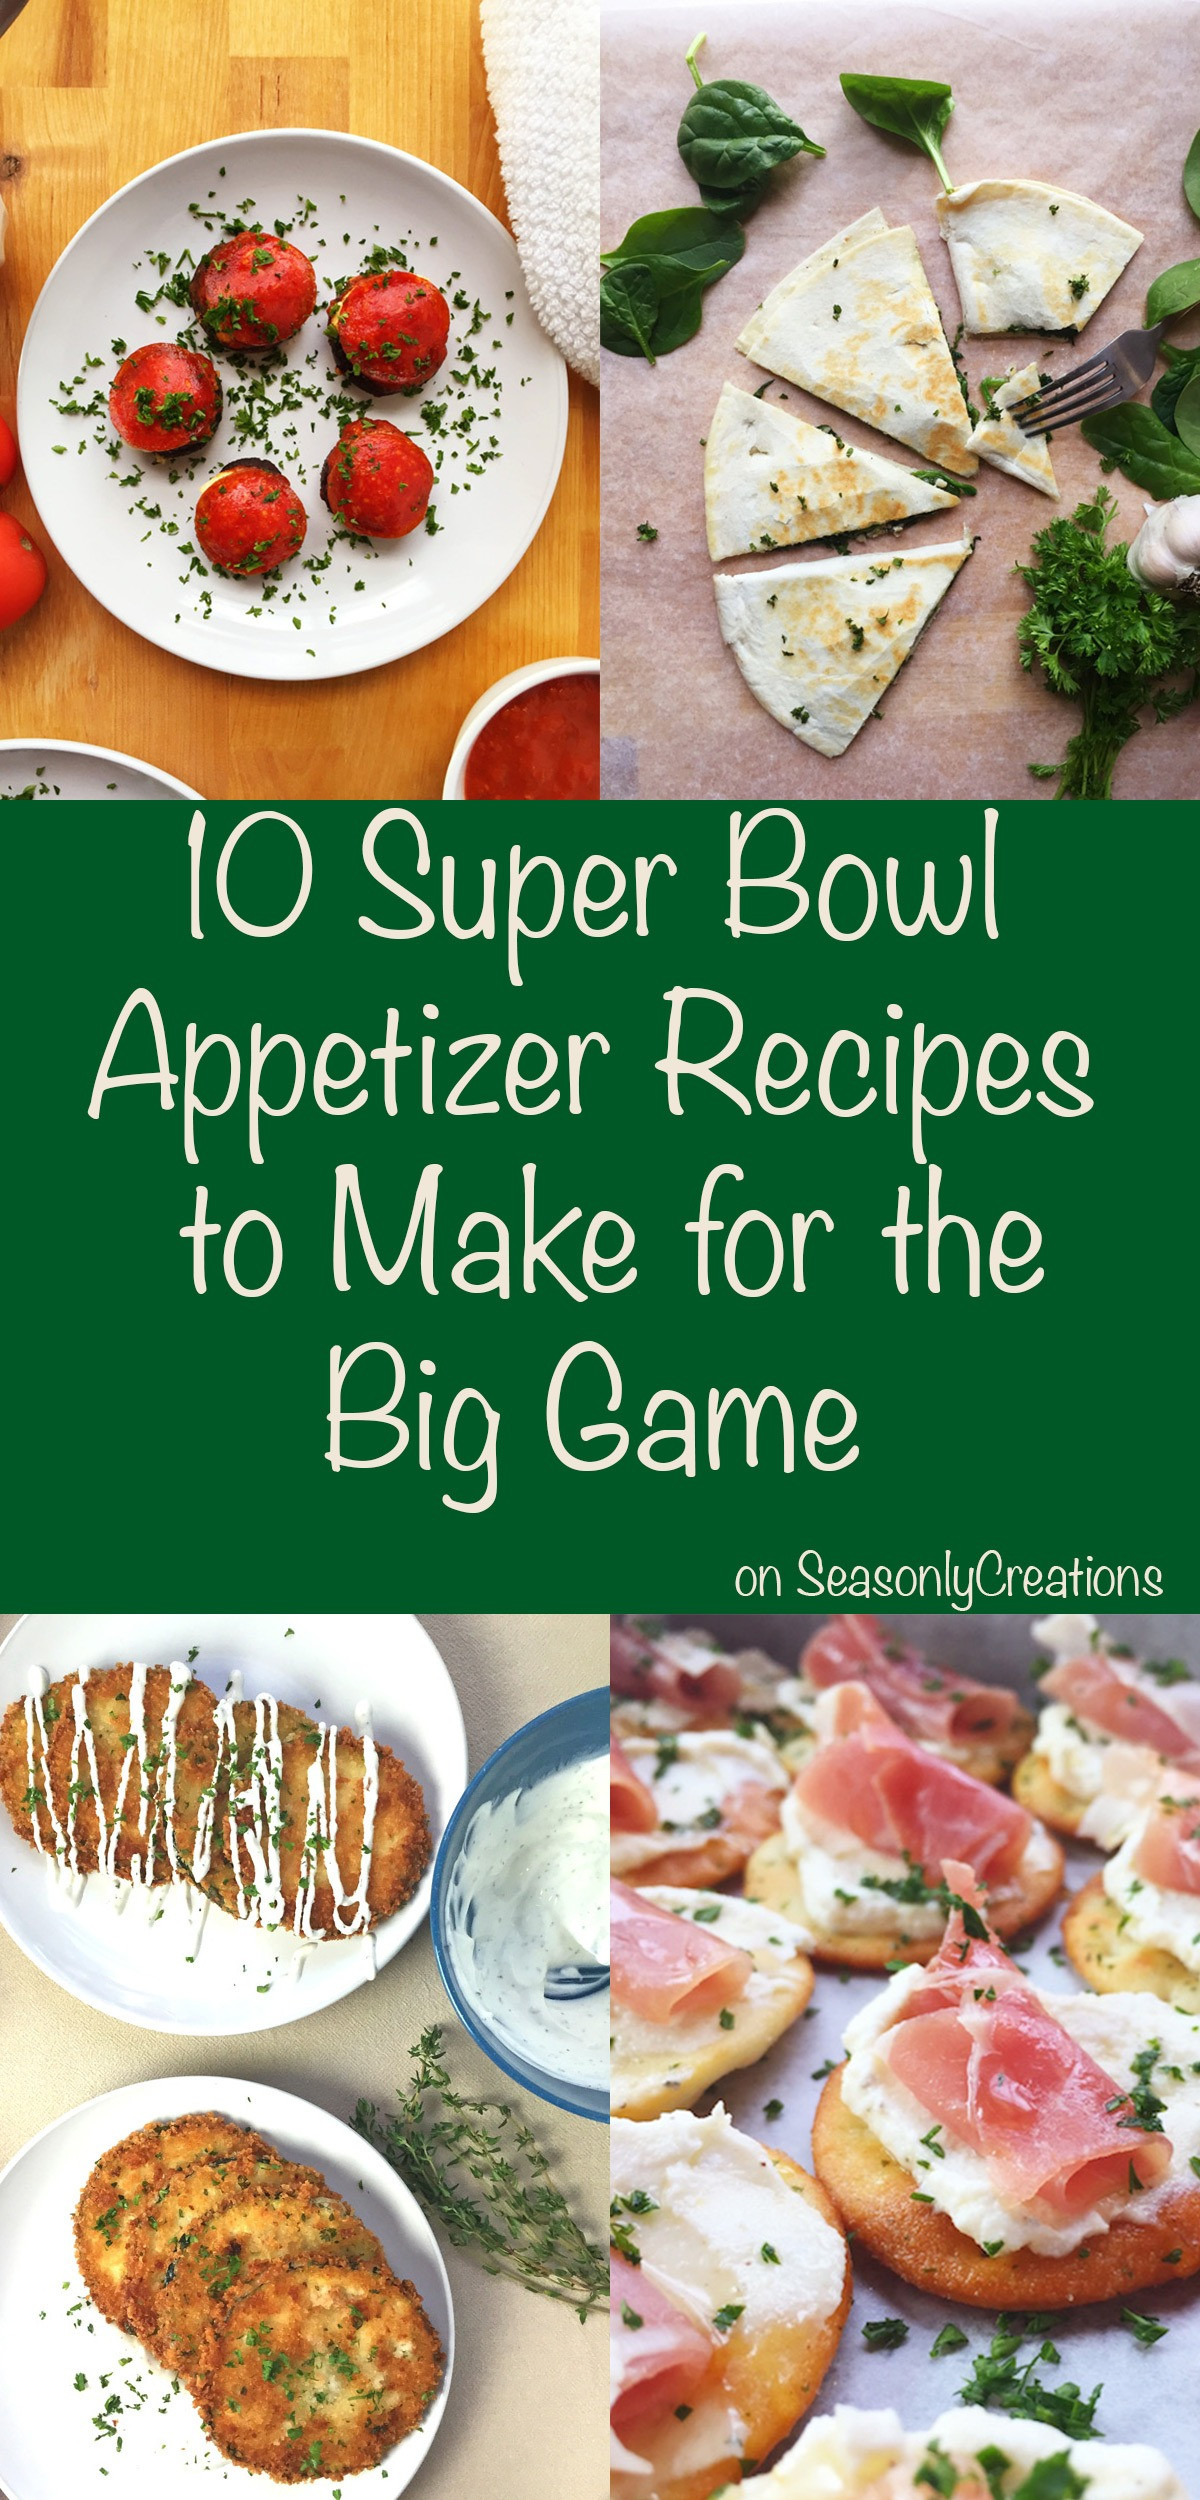 Superbowl Healthy Appetizers
 10 Super Bowl Appetizer Recipes to Make for the Big Game